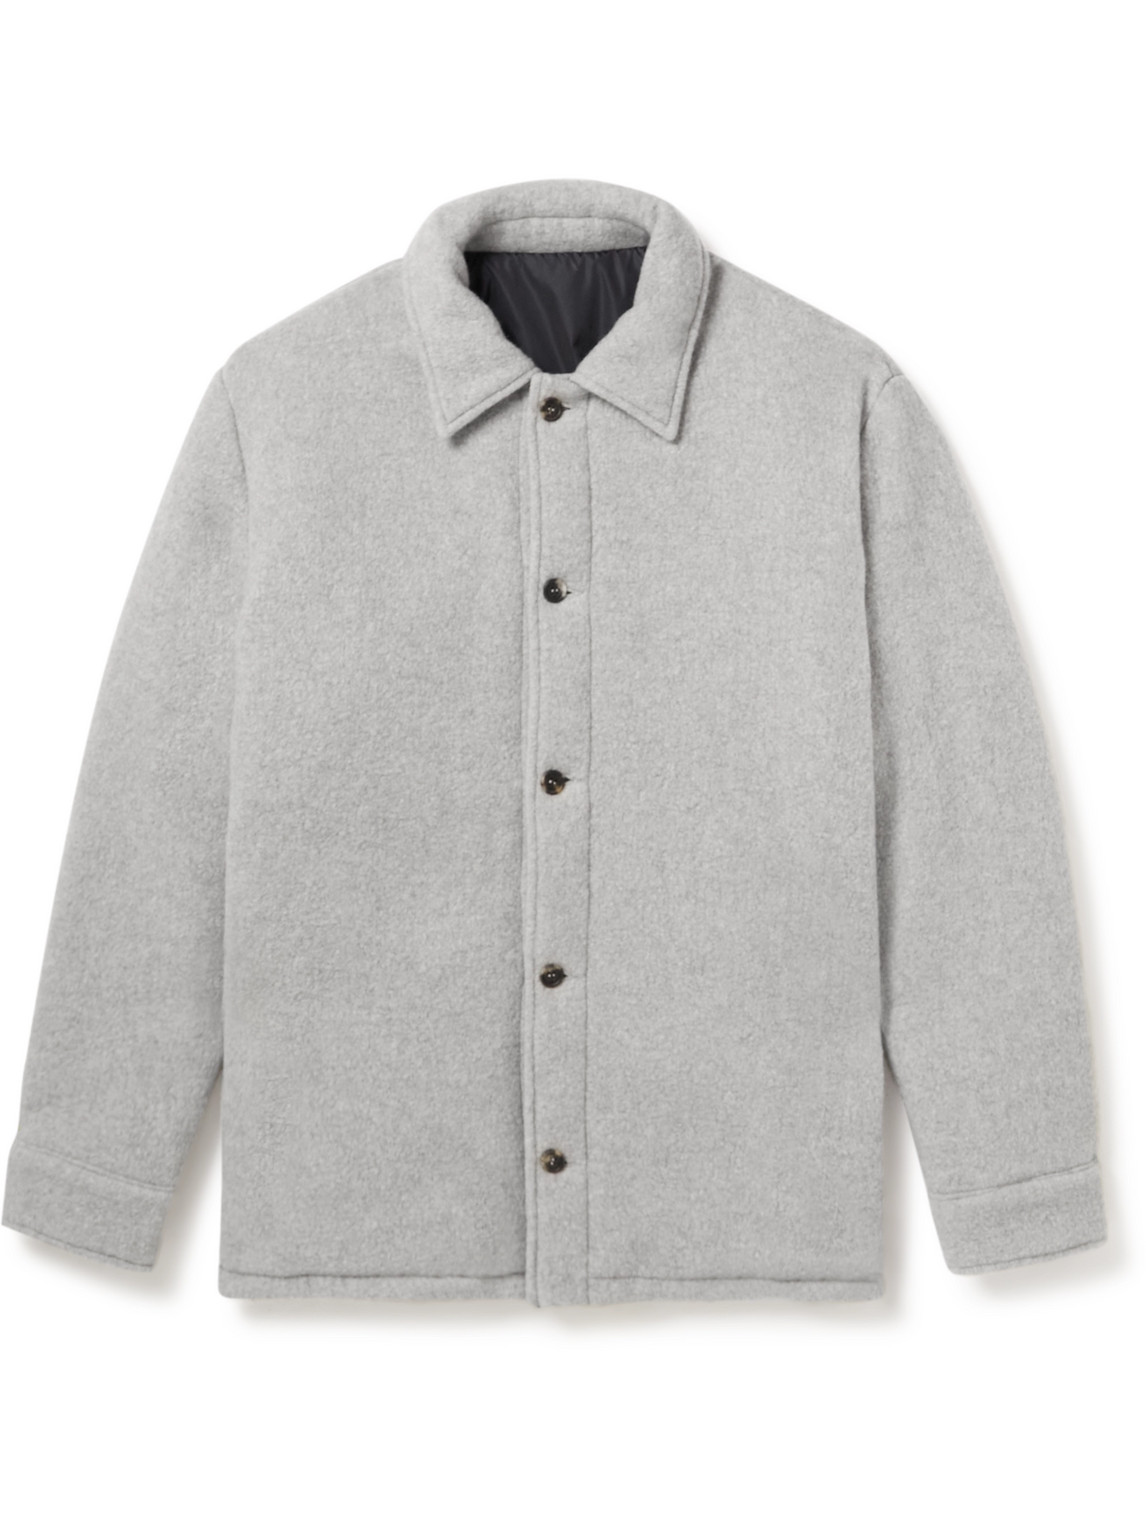 GABRIELA HEARST ARGUS REVERSIBLE RECYCLED-CASHMERE AND SHELL JACKET